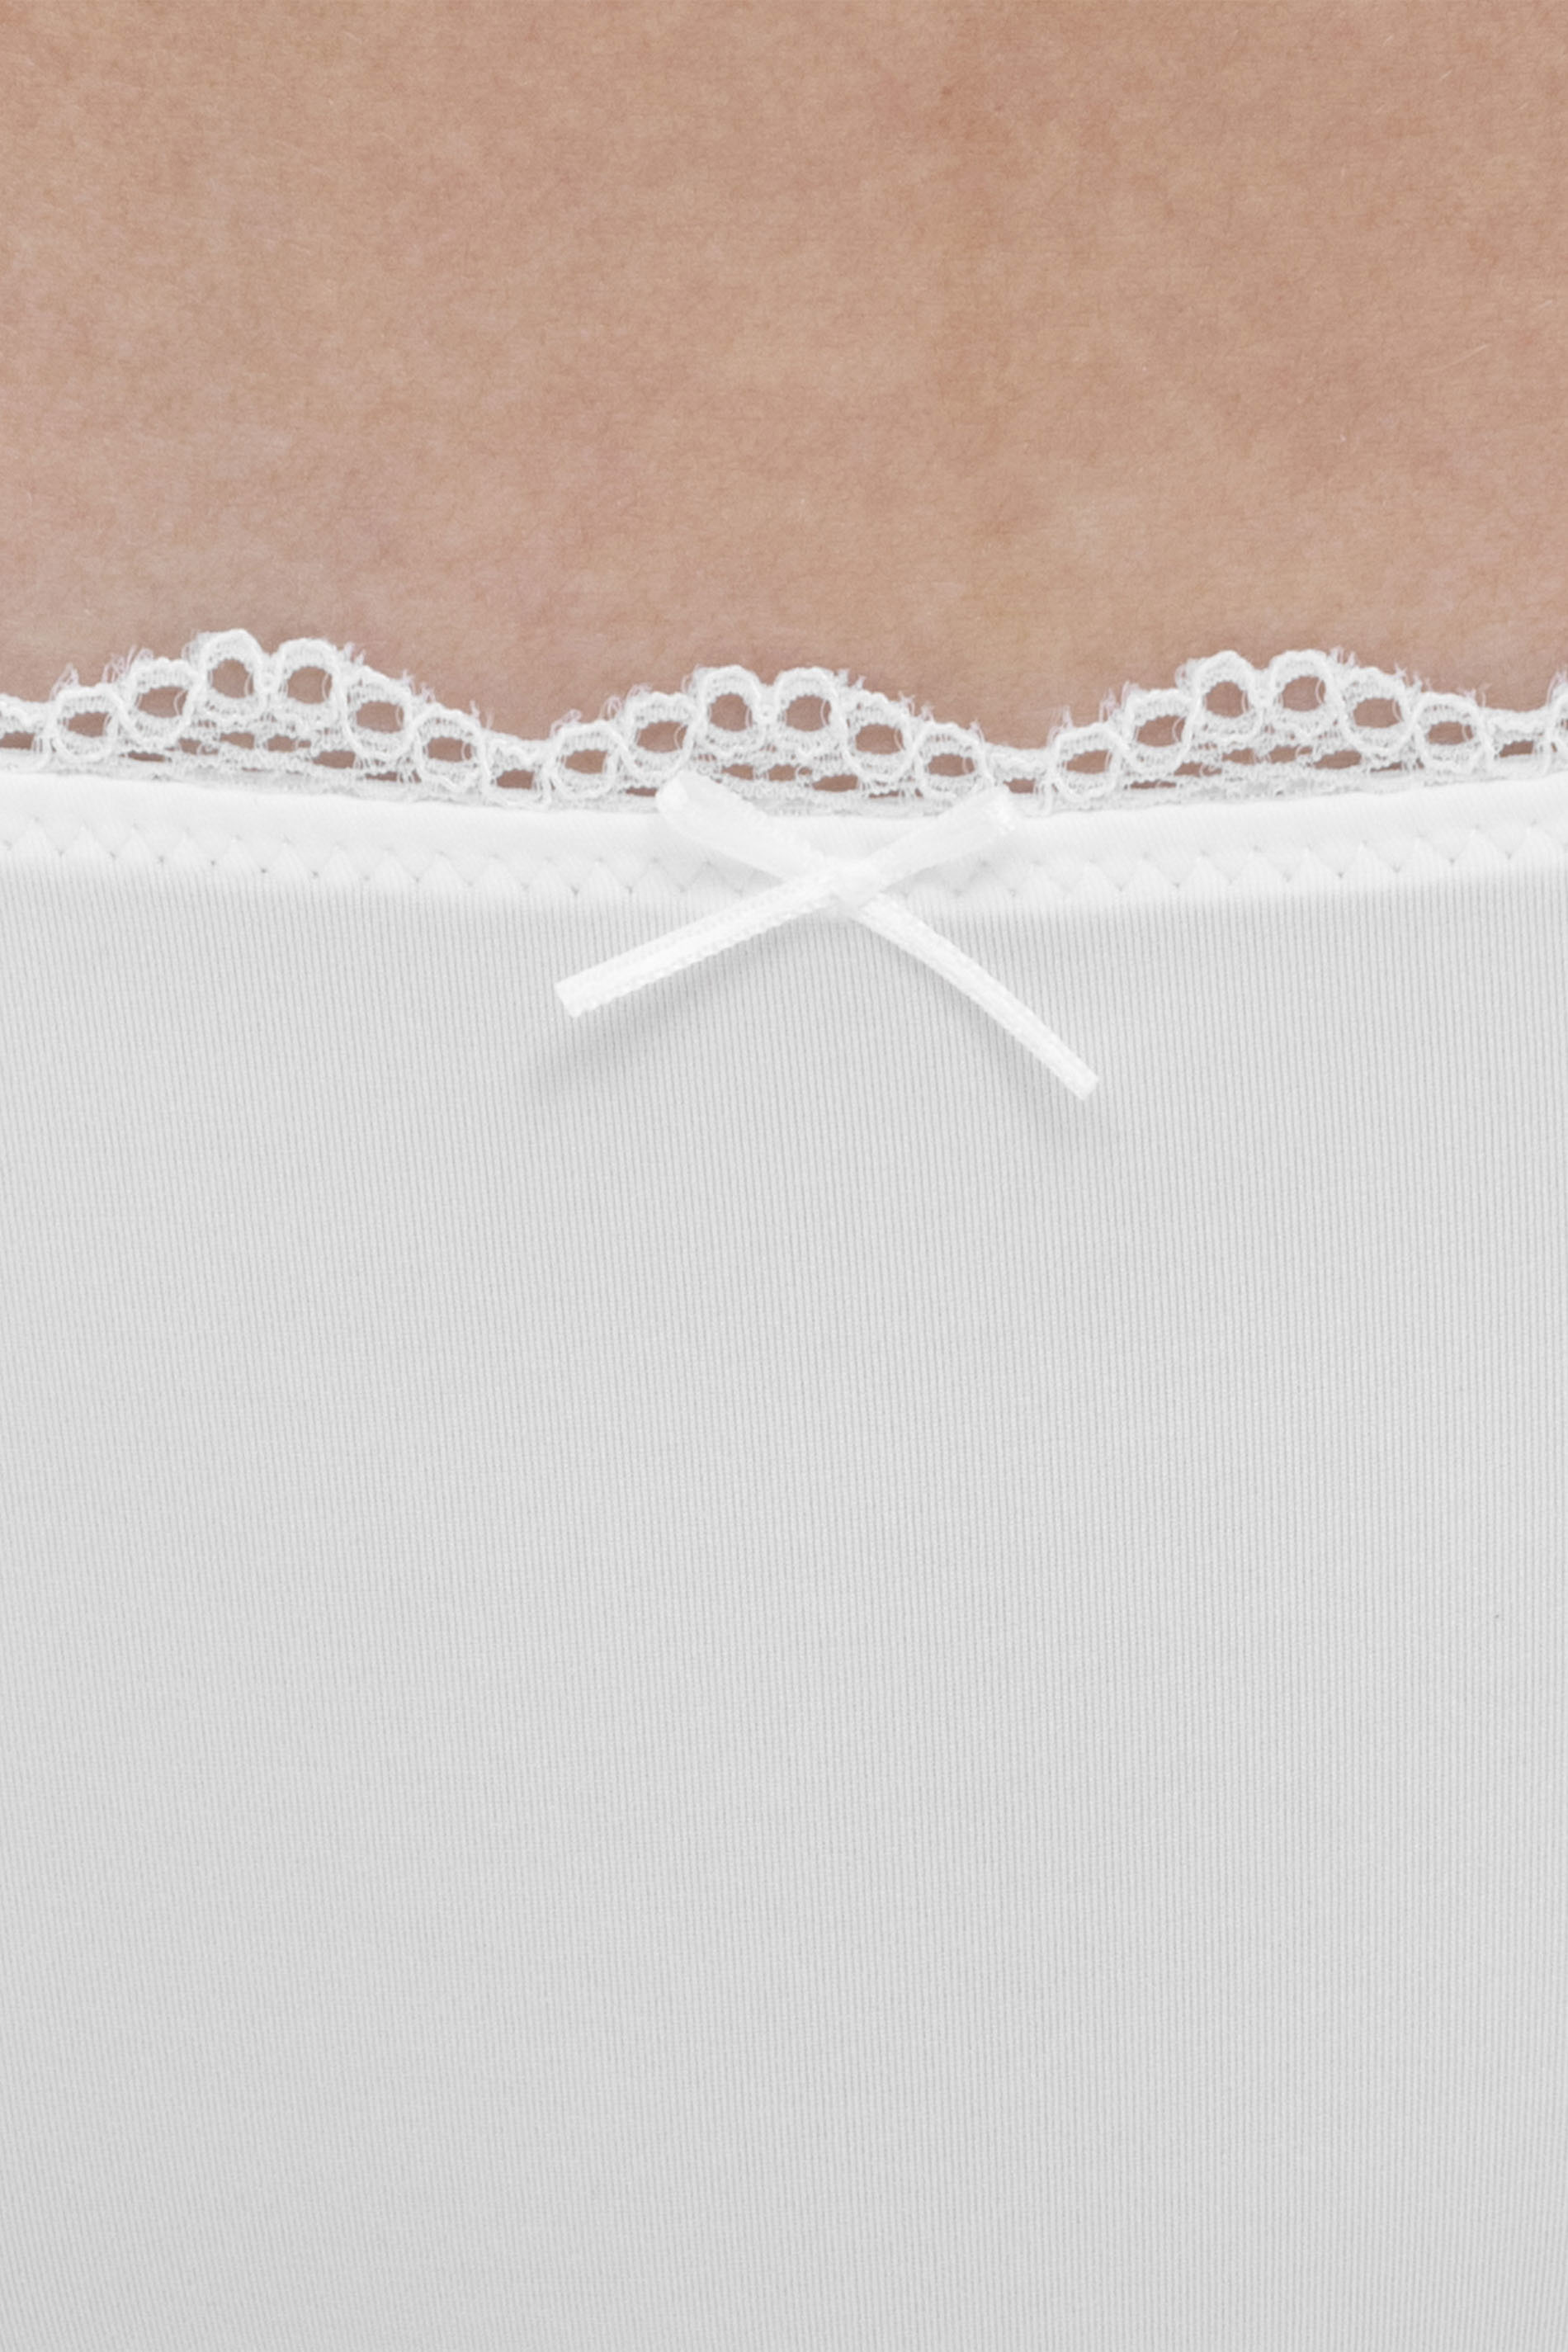 Hipster White Serie Amorous Detail View 01 | mey®